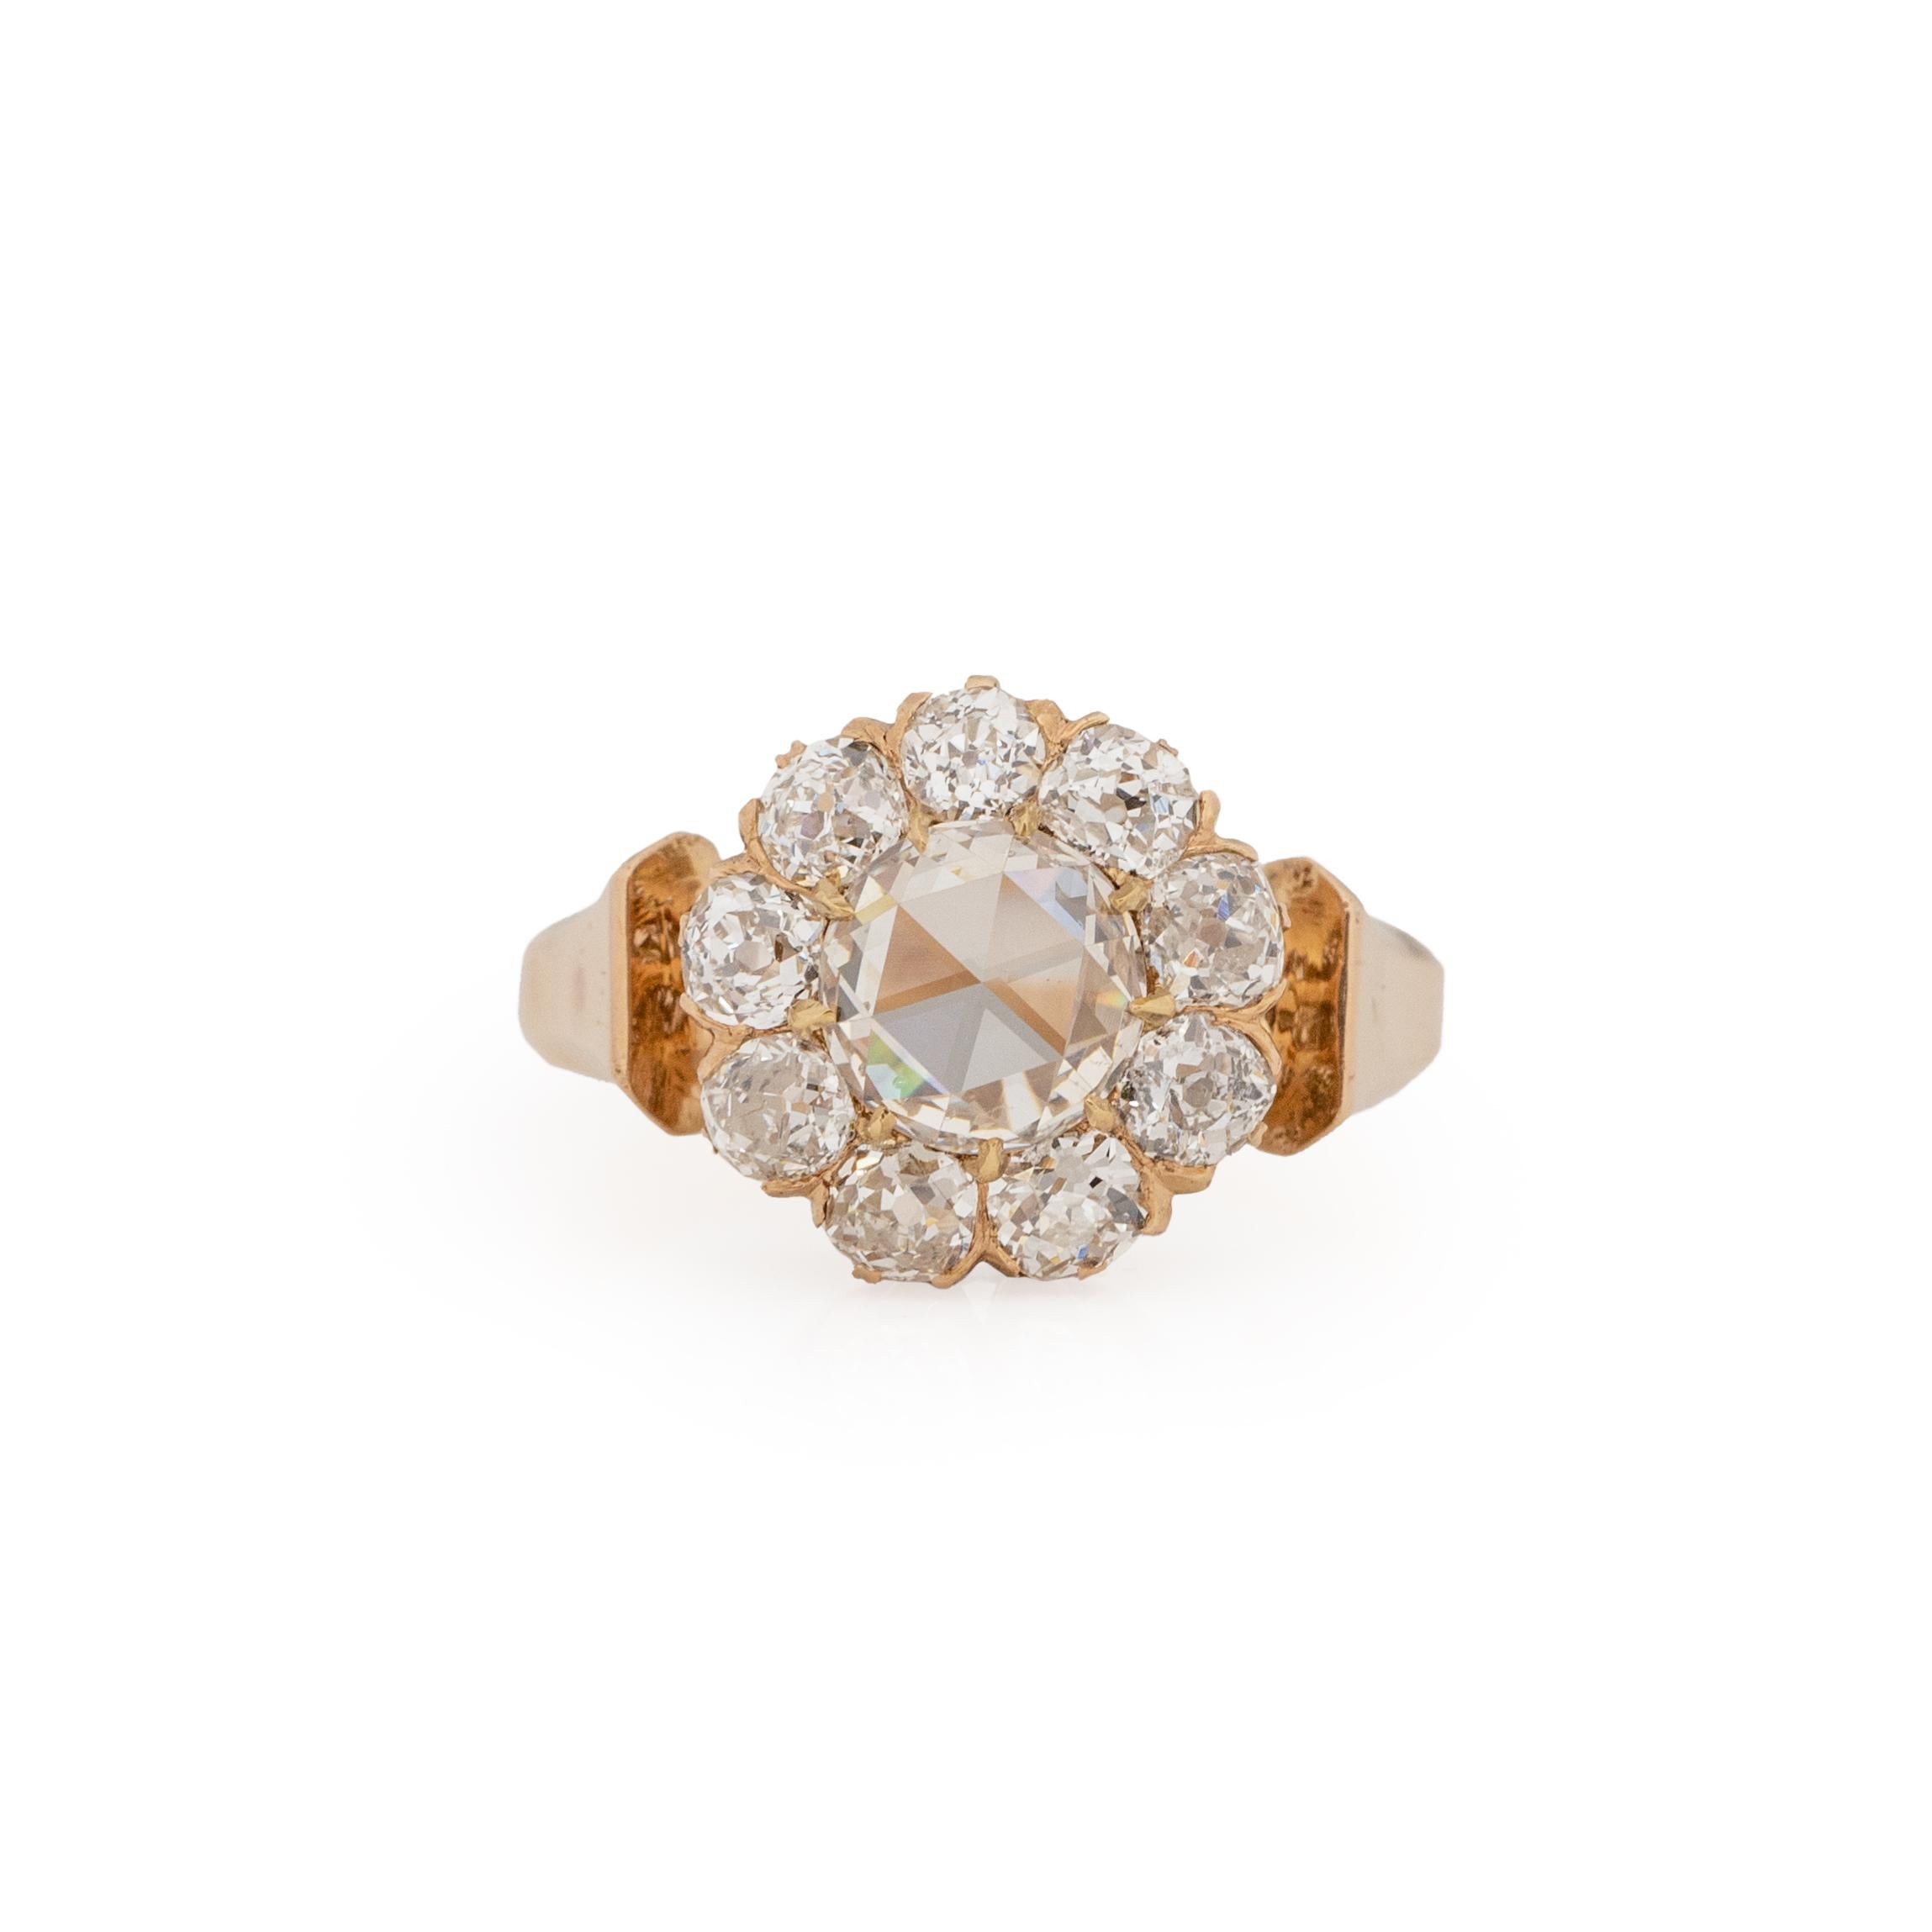 This Victorian showstopper is a bold and elegant look. Crafted in 14K yellow gold with a rose tint, the flared tapered shanks gold up a beautiful and intricate prong setting gallery. These prongs hold up over one total carat of diamonds. In the